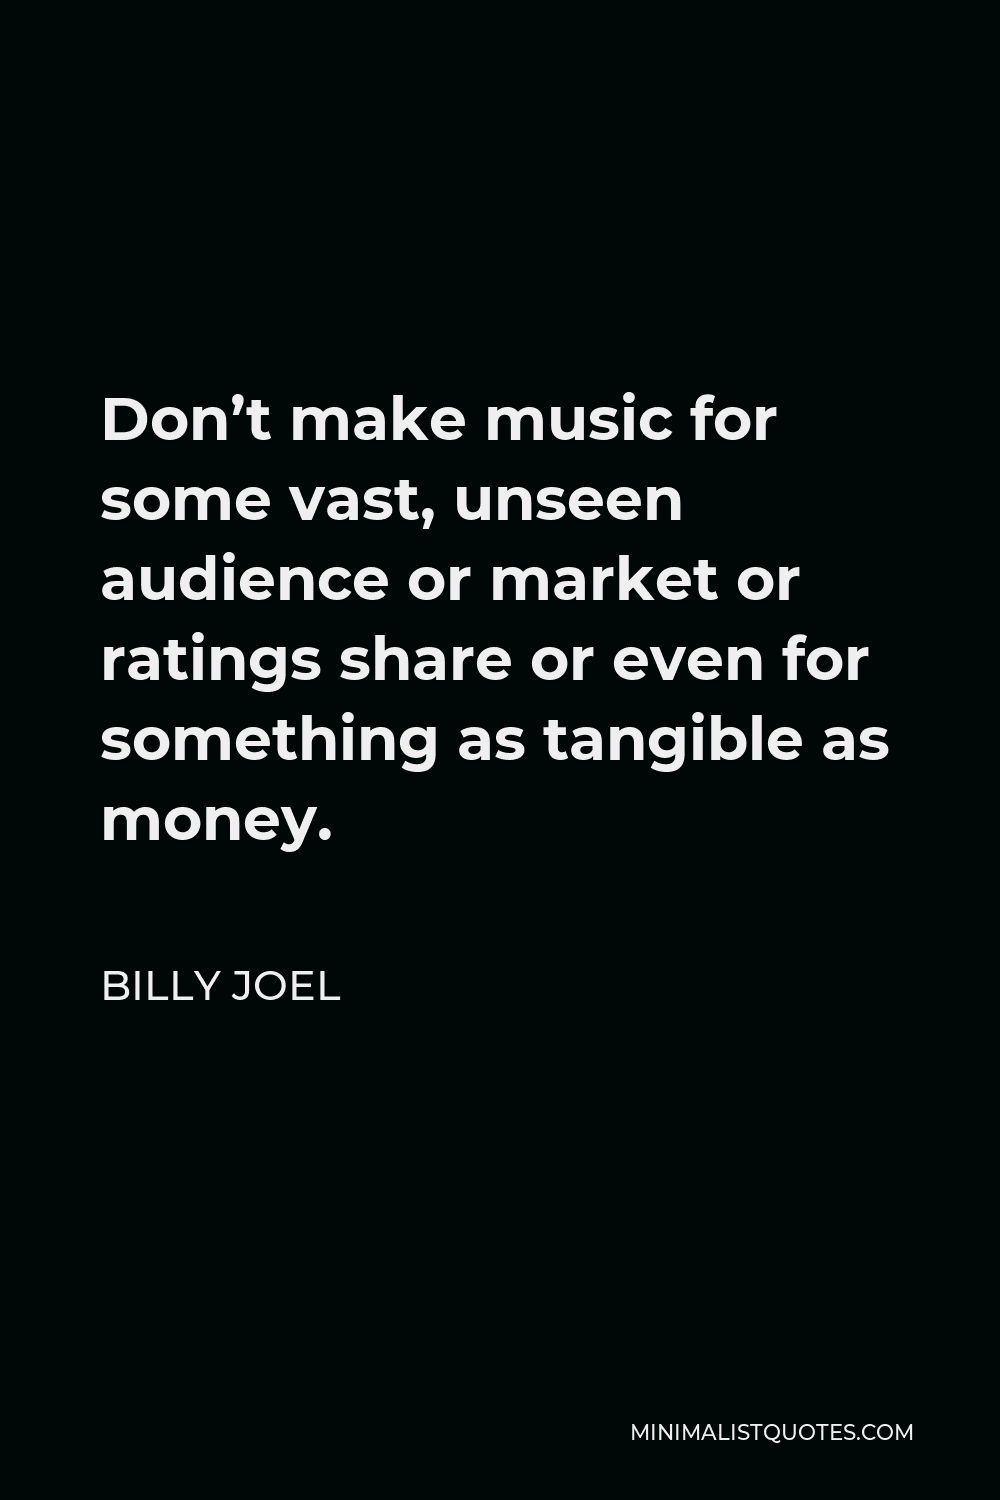 Billy Joel Quote - Don’t make music for some vast, unseen audience or market or ratings share or even for something as tangible as money.